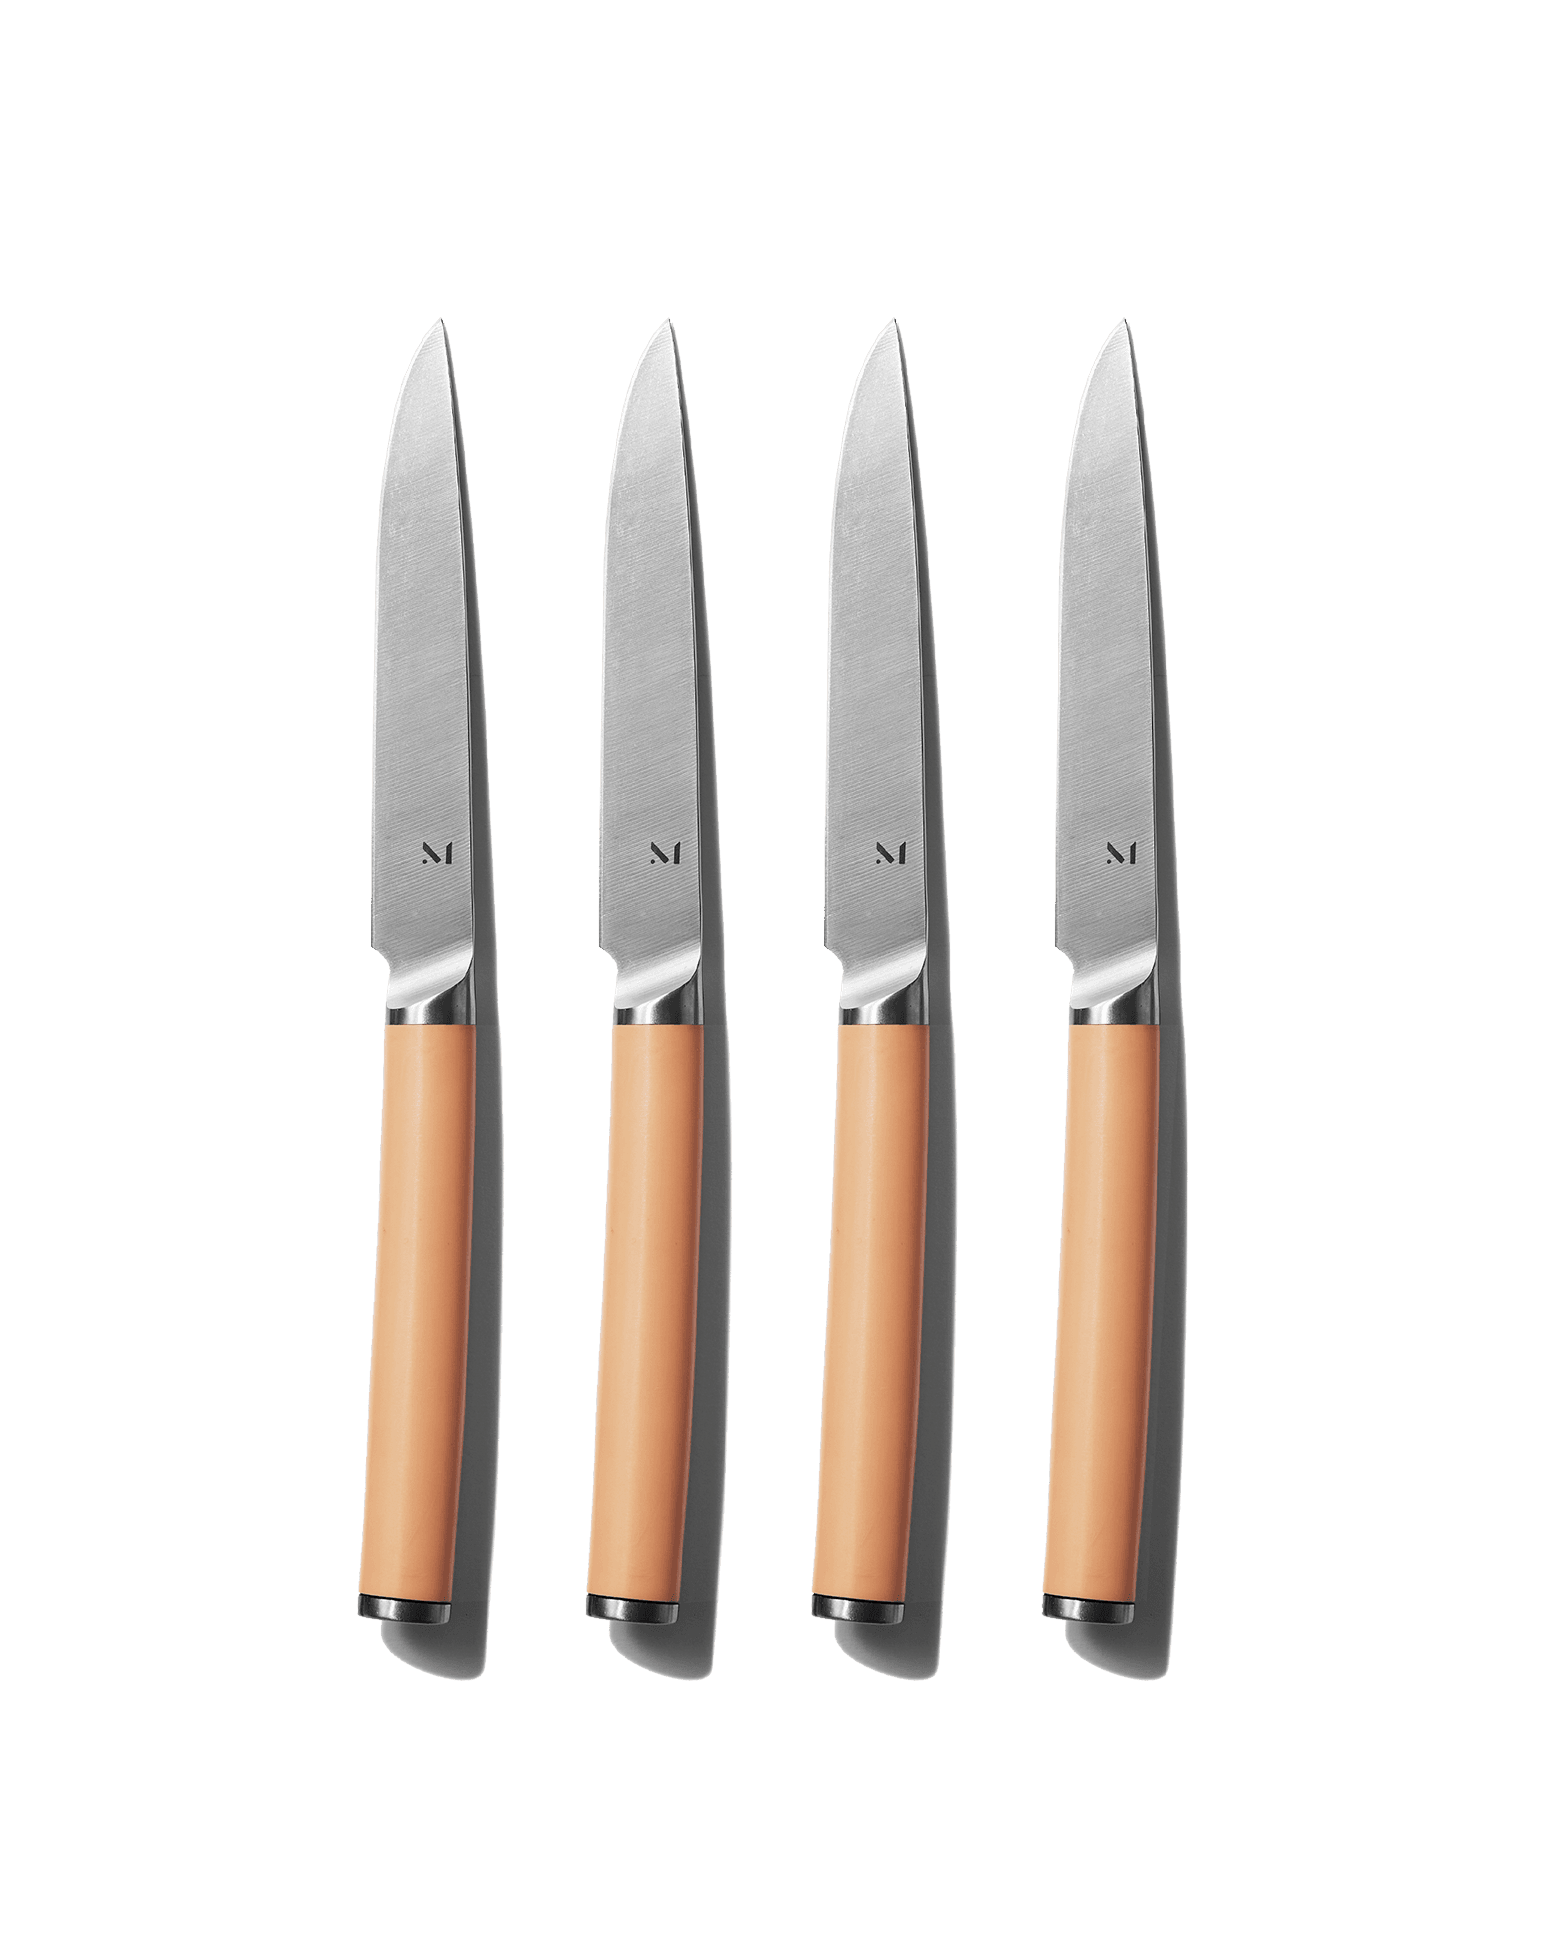 A Guide to Common Knife Handle Materials - Exquisite Knives